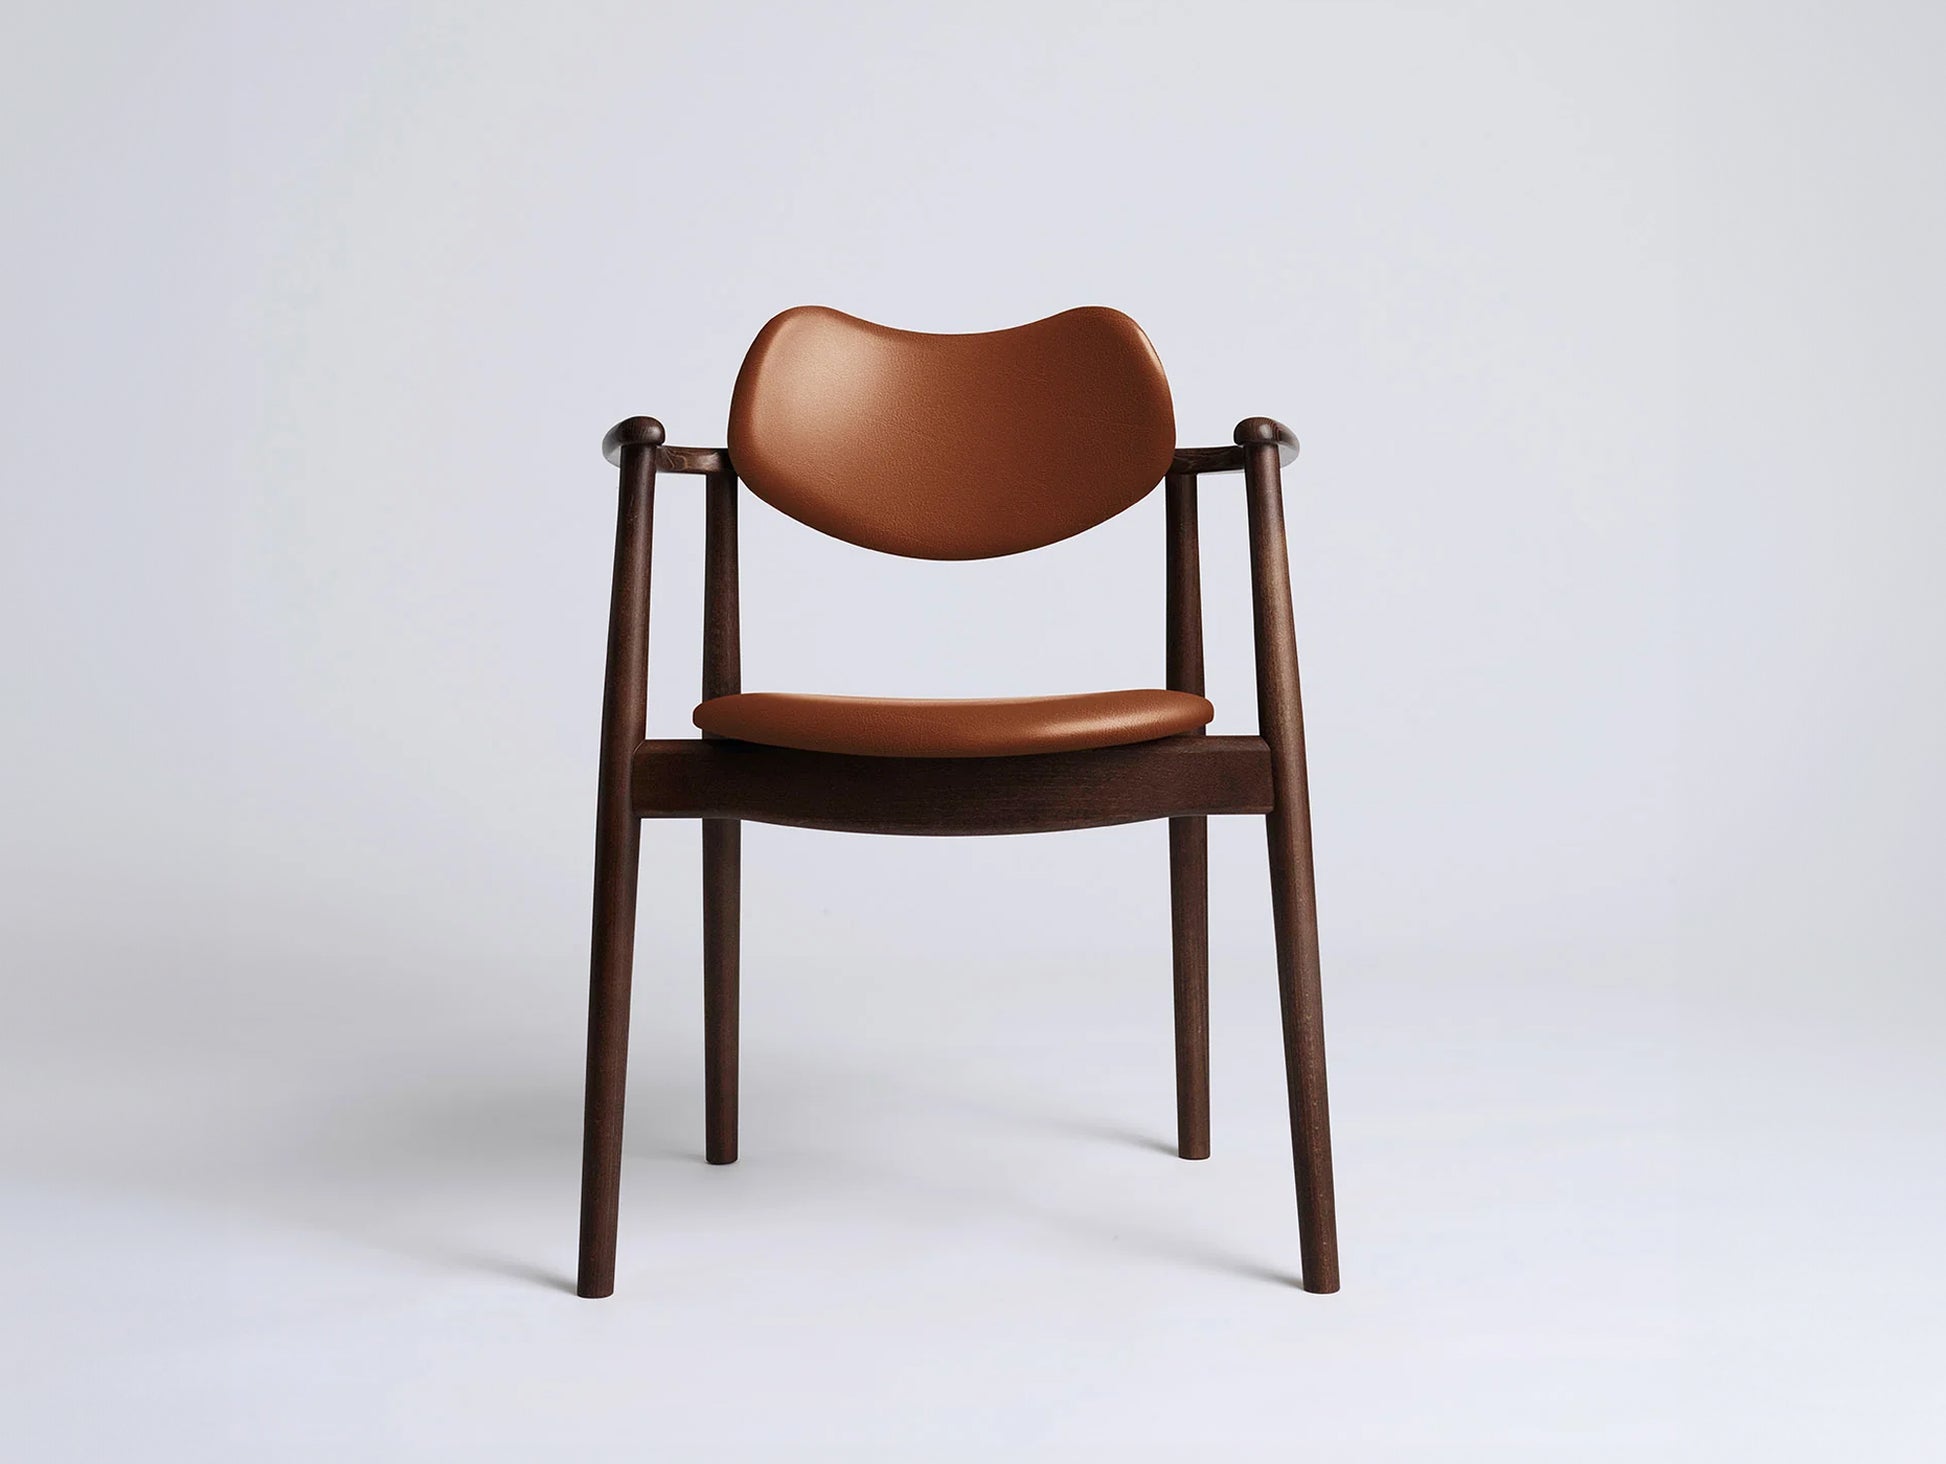 Regatta Chair Seat and Back Upholstered by Ro Collection - Walnut Stained Beech / Exclusive Rio Cognac Leather